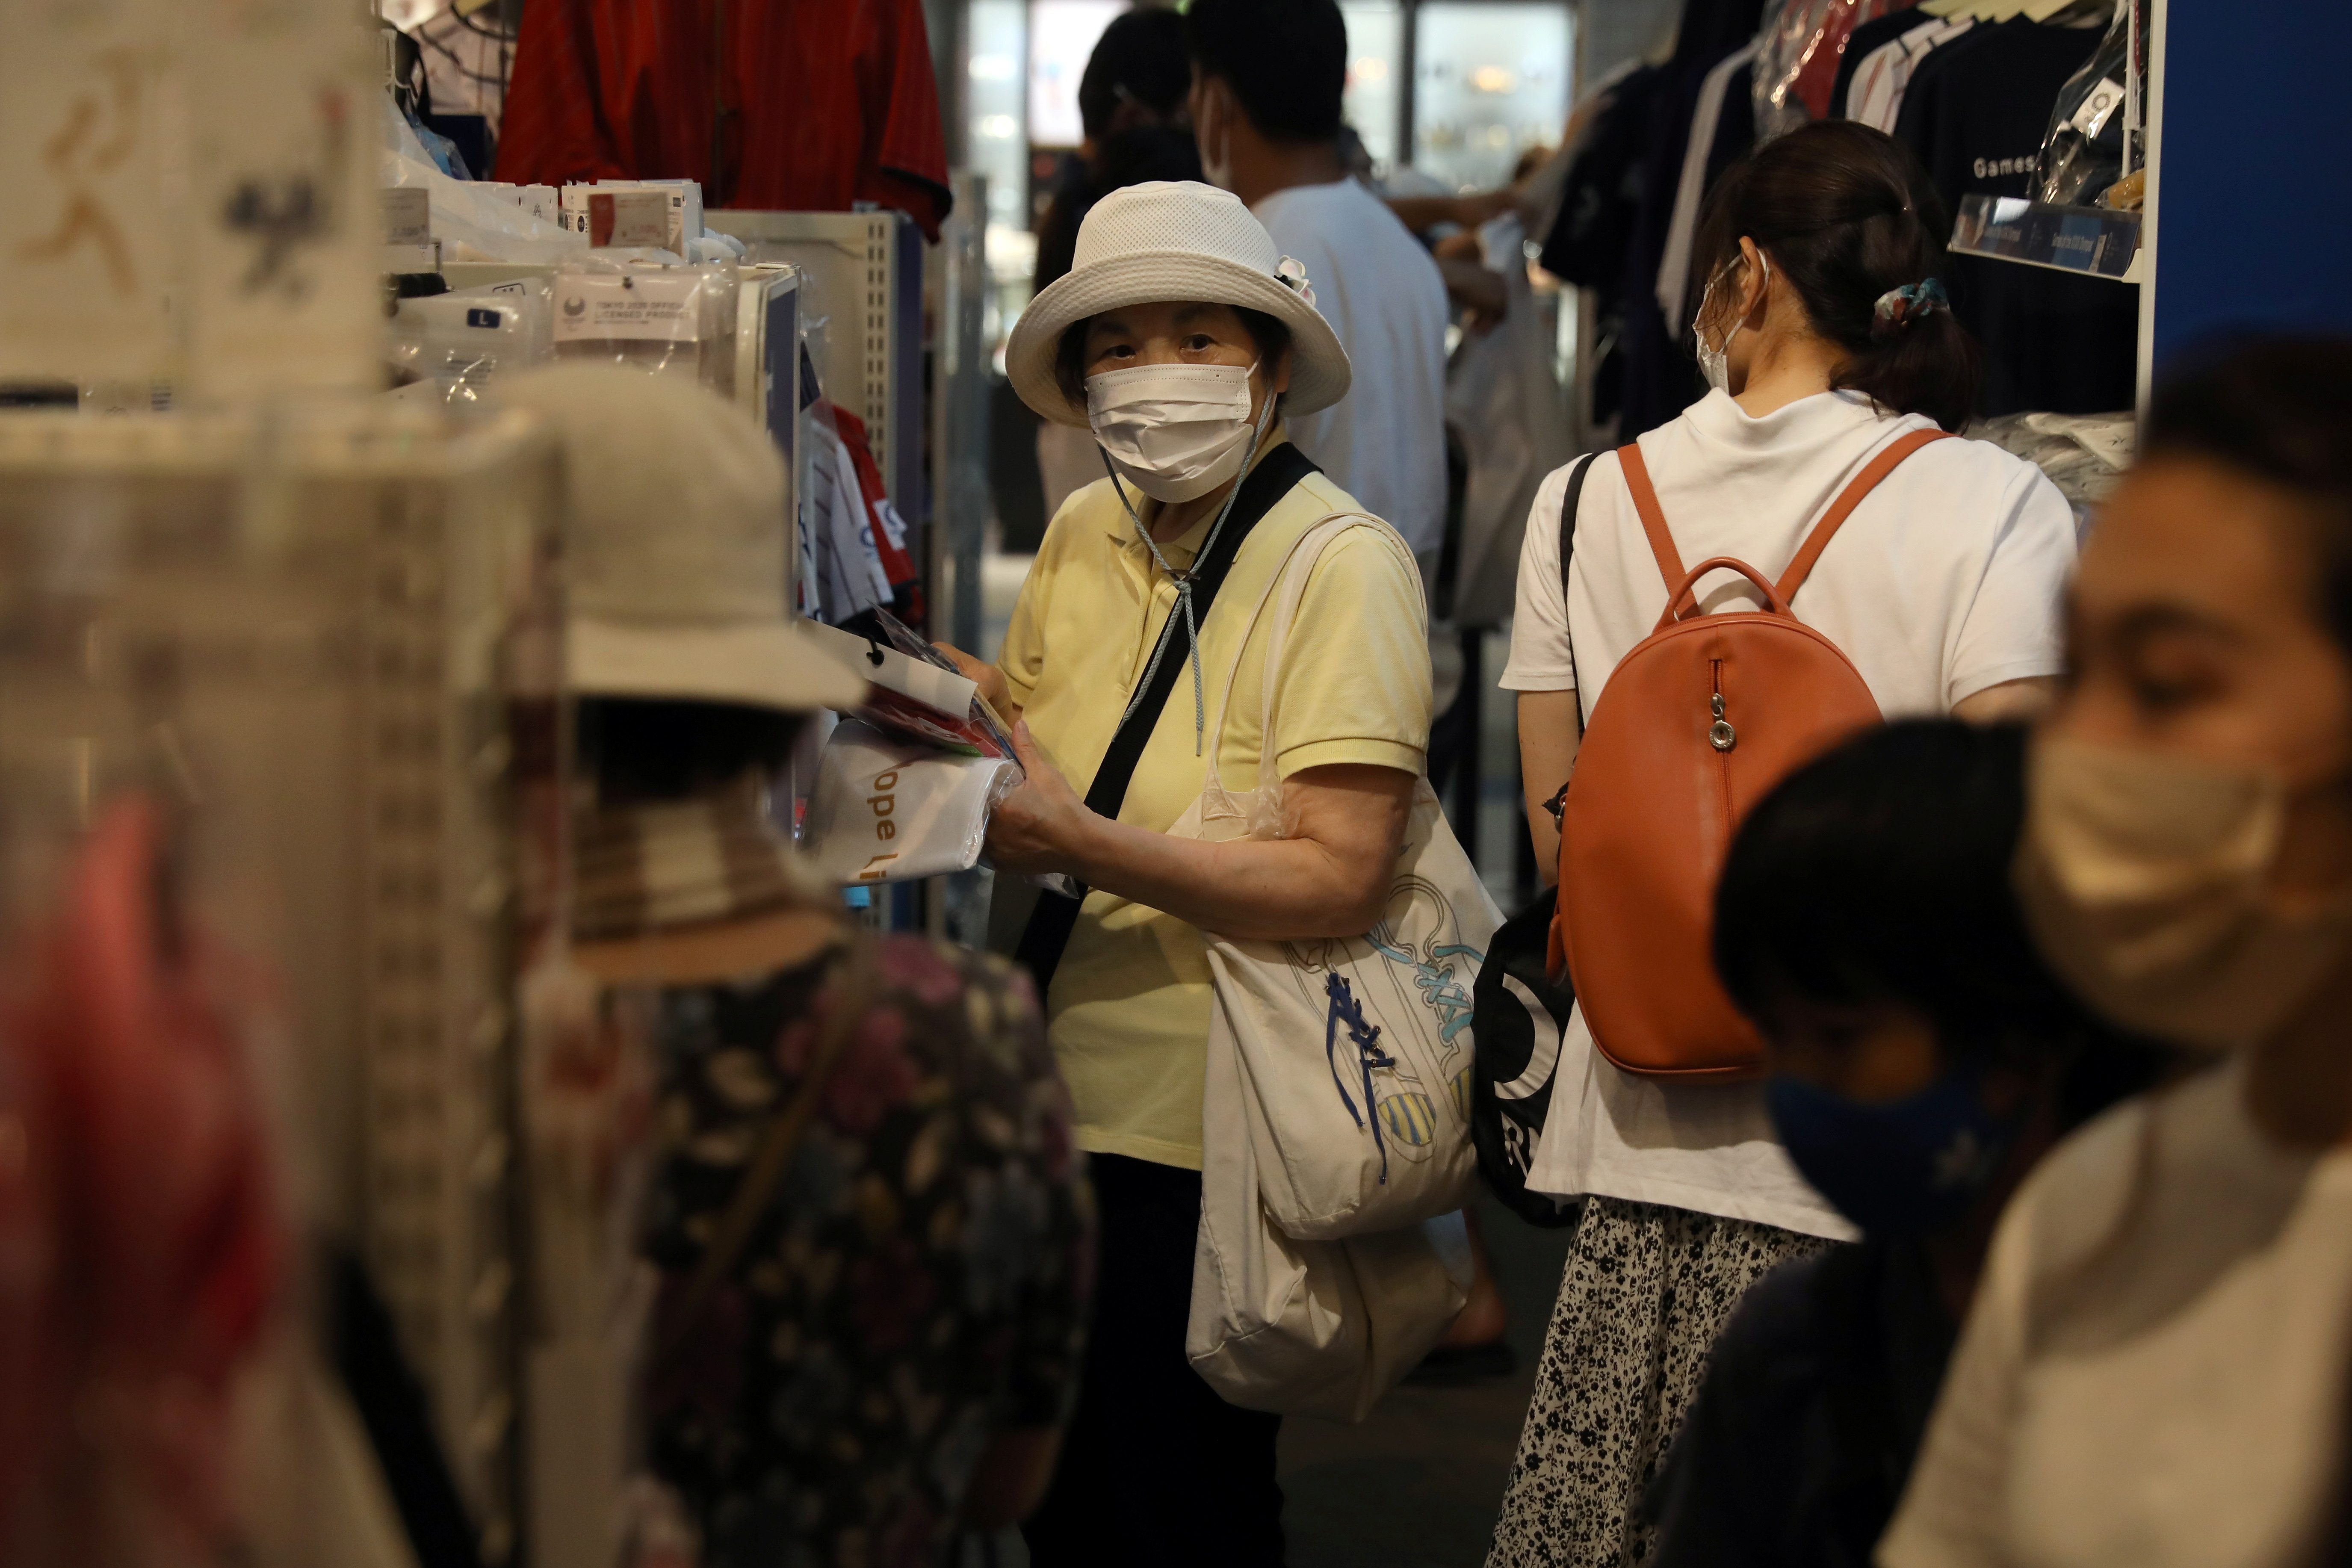 Tokyo daily COVID-19 infections hit record high